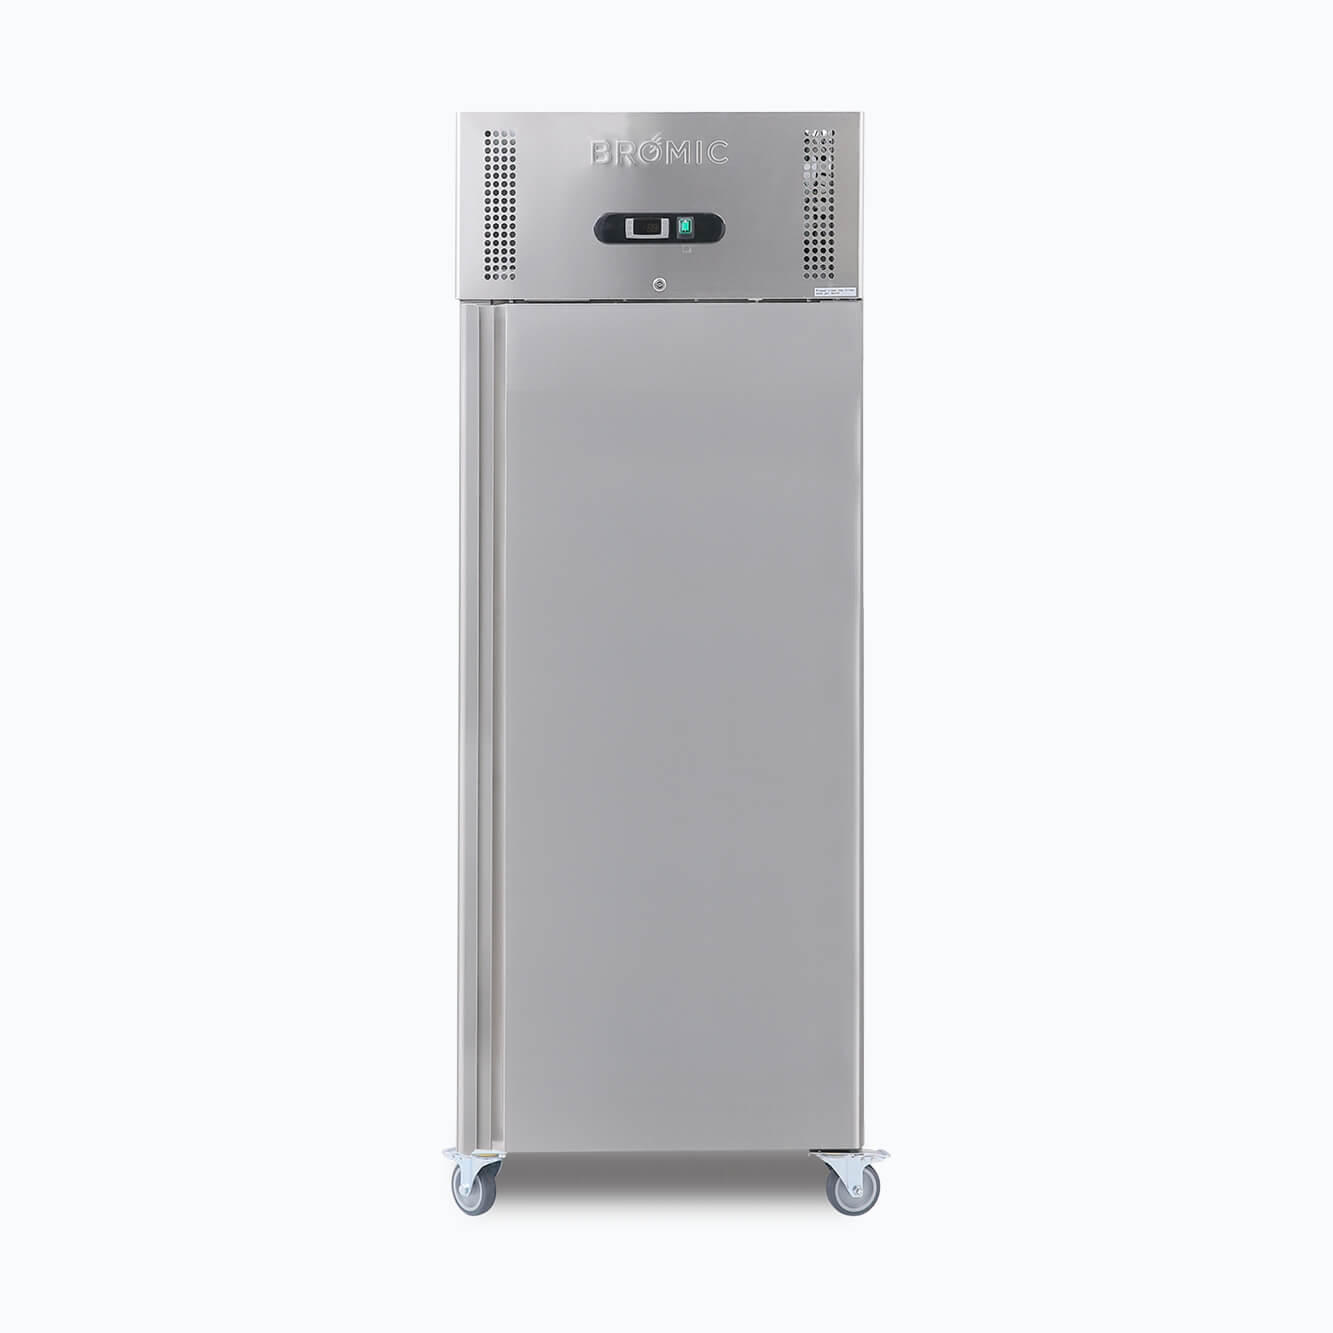 Image of a 650L stainless steel upright storage fridge with one door, front view.